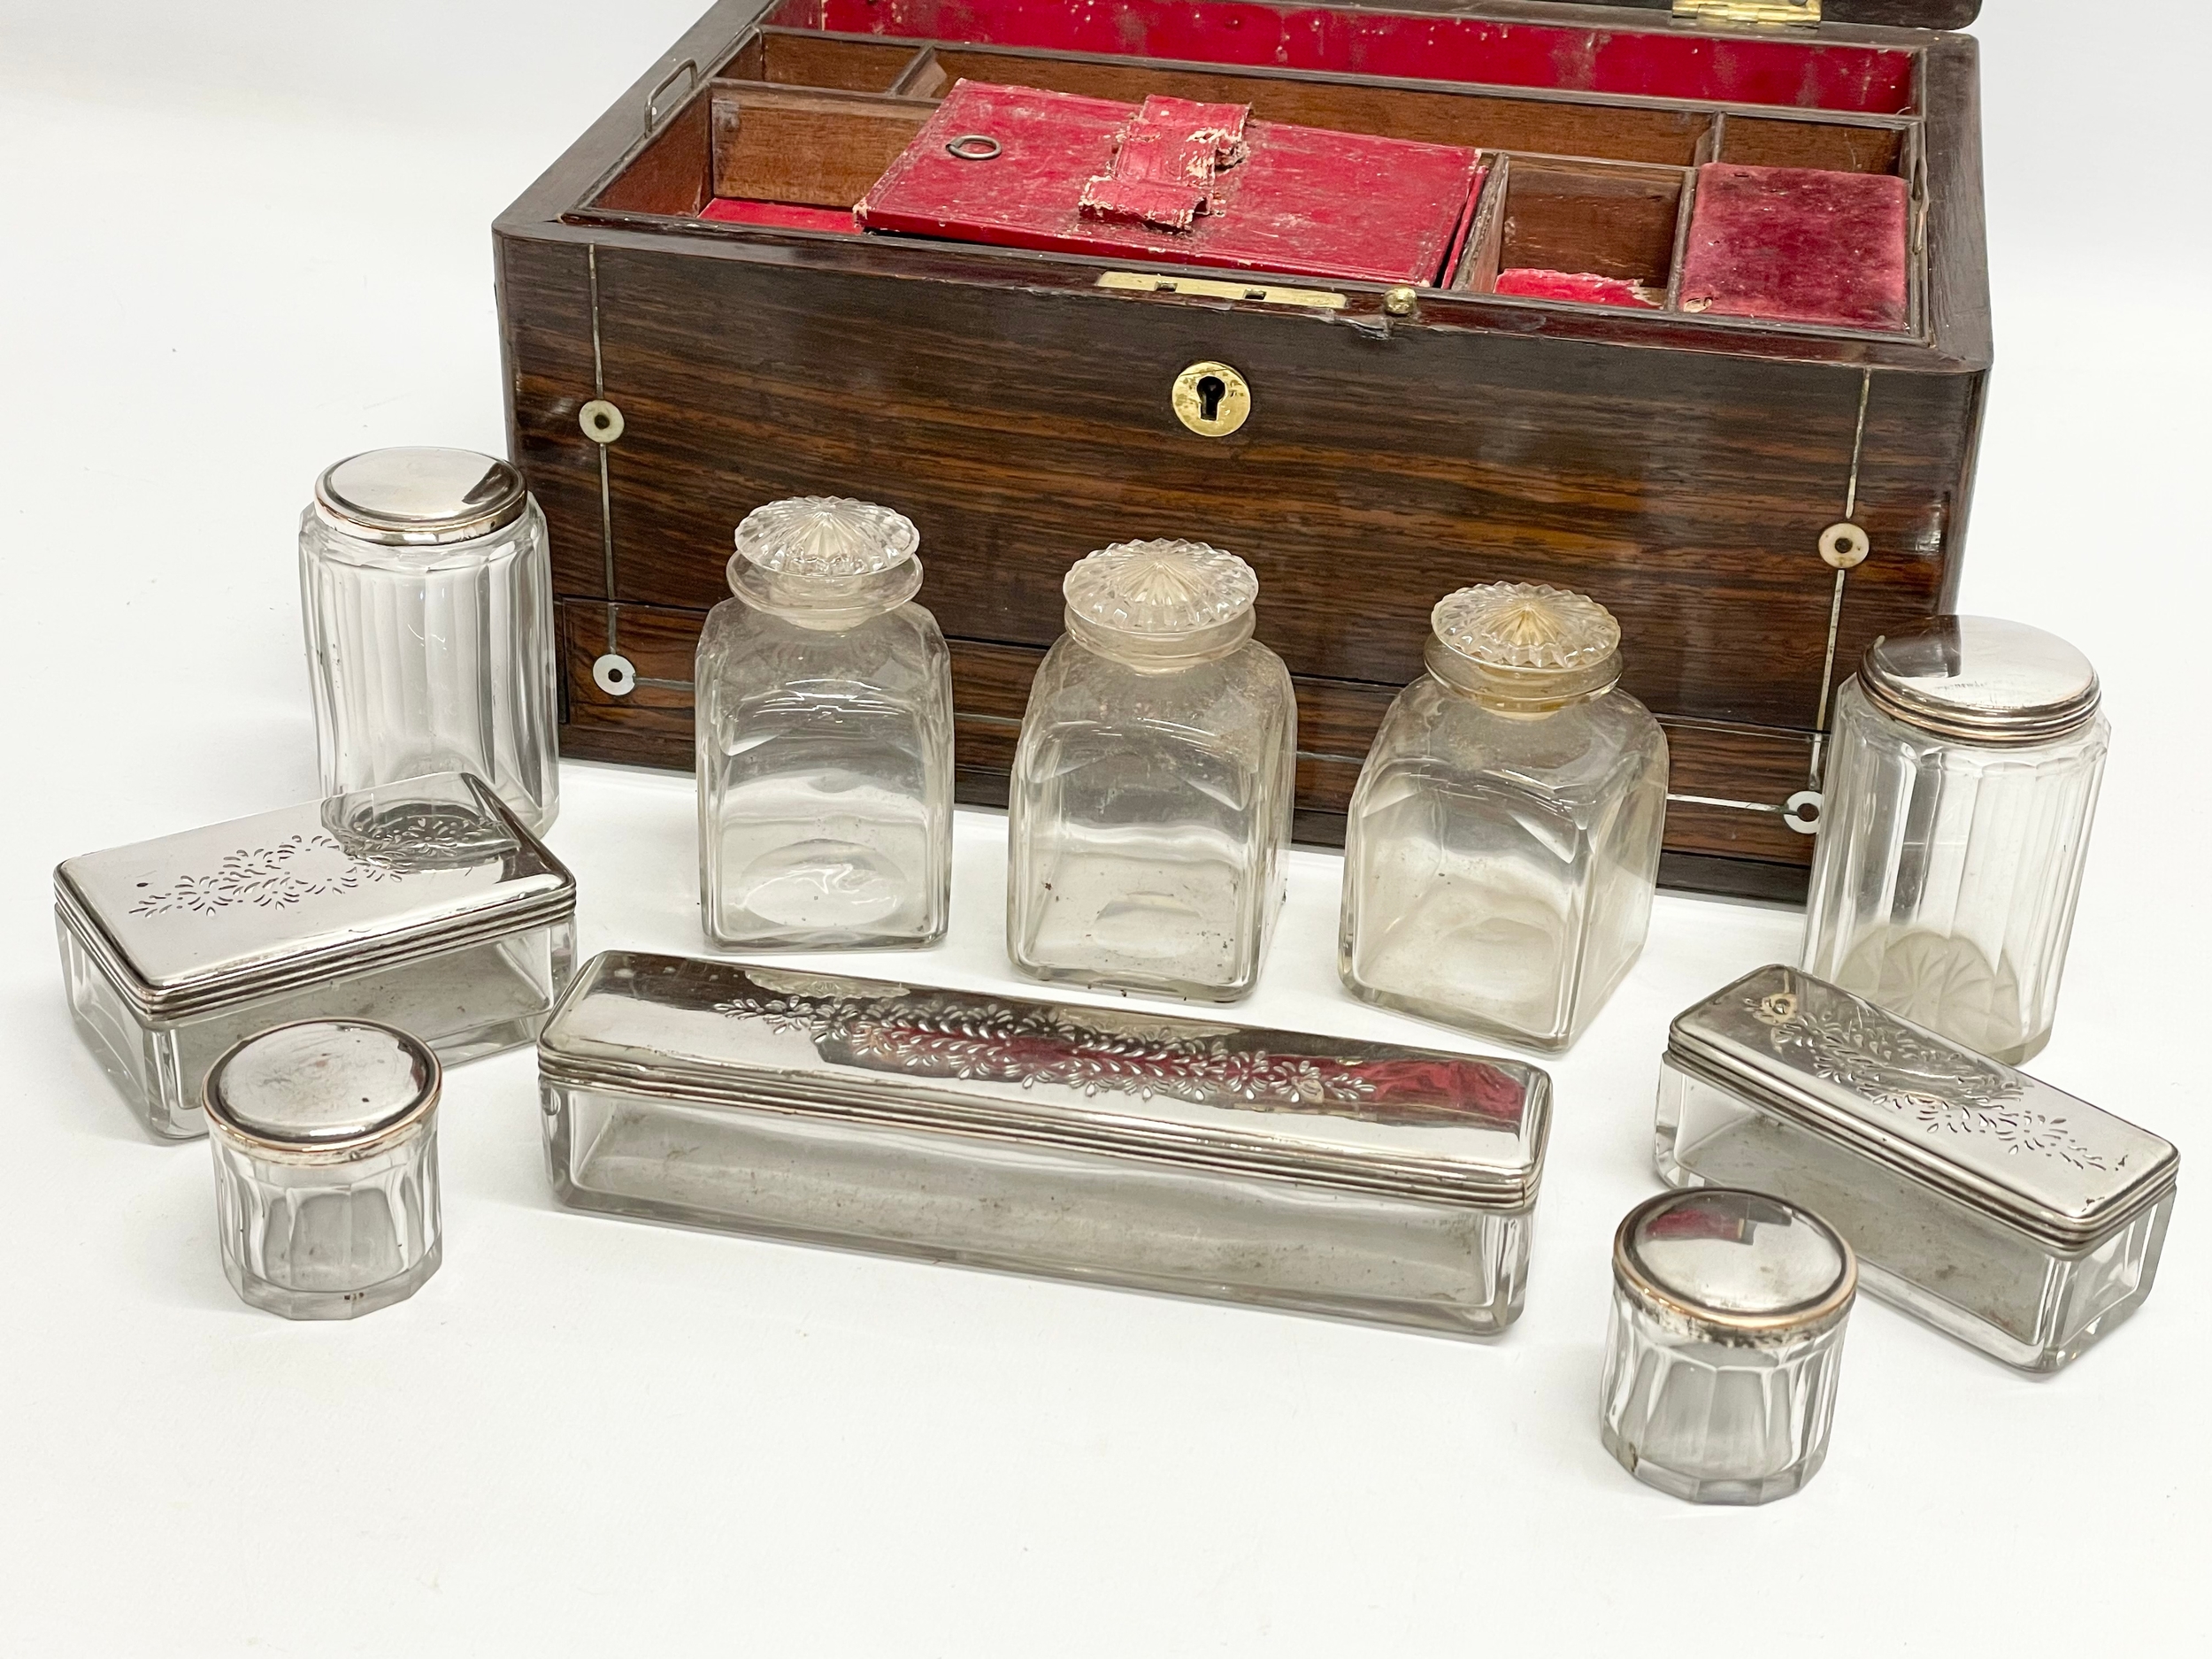 A Victorian rosewood vanity box with Mother of Pearl inlay and cut glass bottles with silver - Image 7 of 11